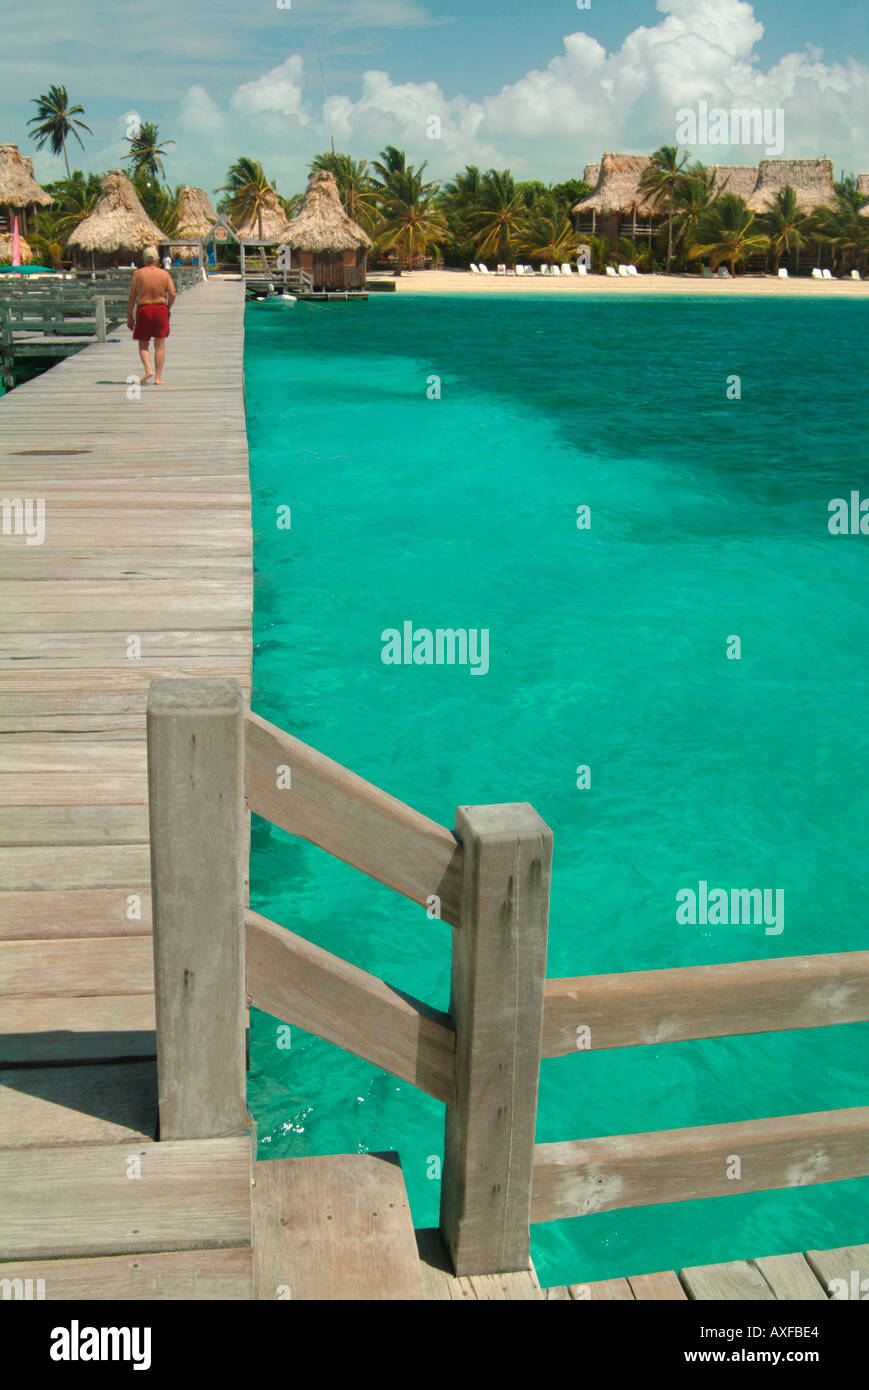 A long wooden pier juts into the Caribbean Sea from a tropical beach with thatched huts Stock Photo